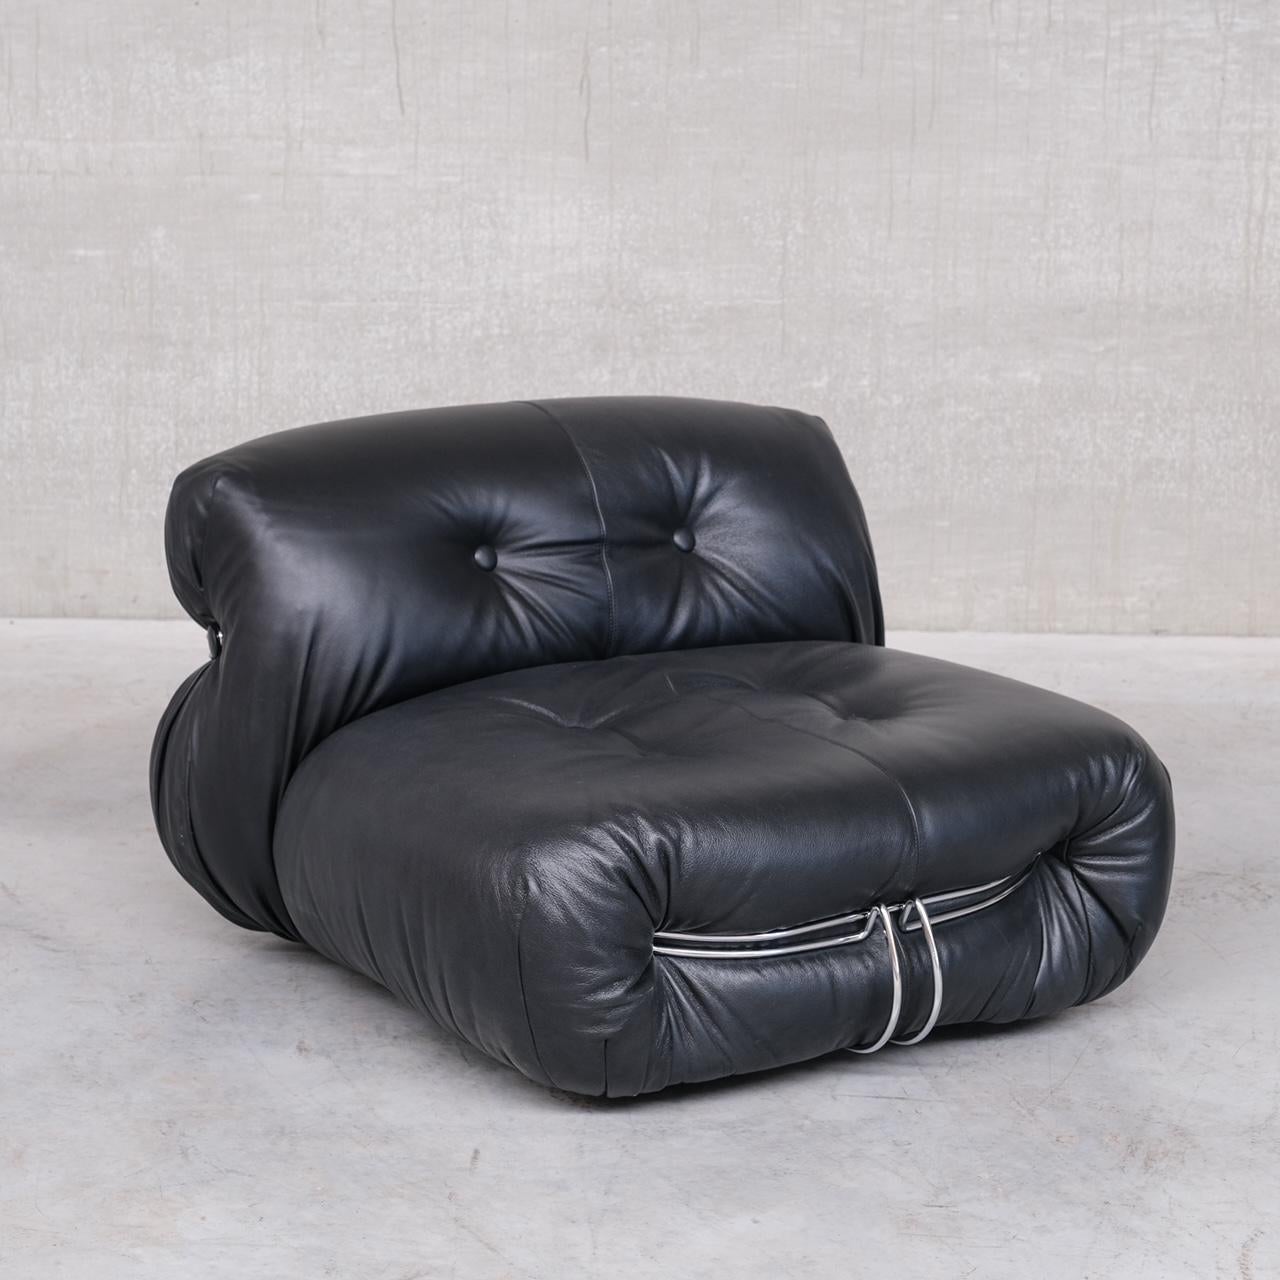 Pair of Leather Soriana Lounge Chairs by Scarpa for Cassina 9